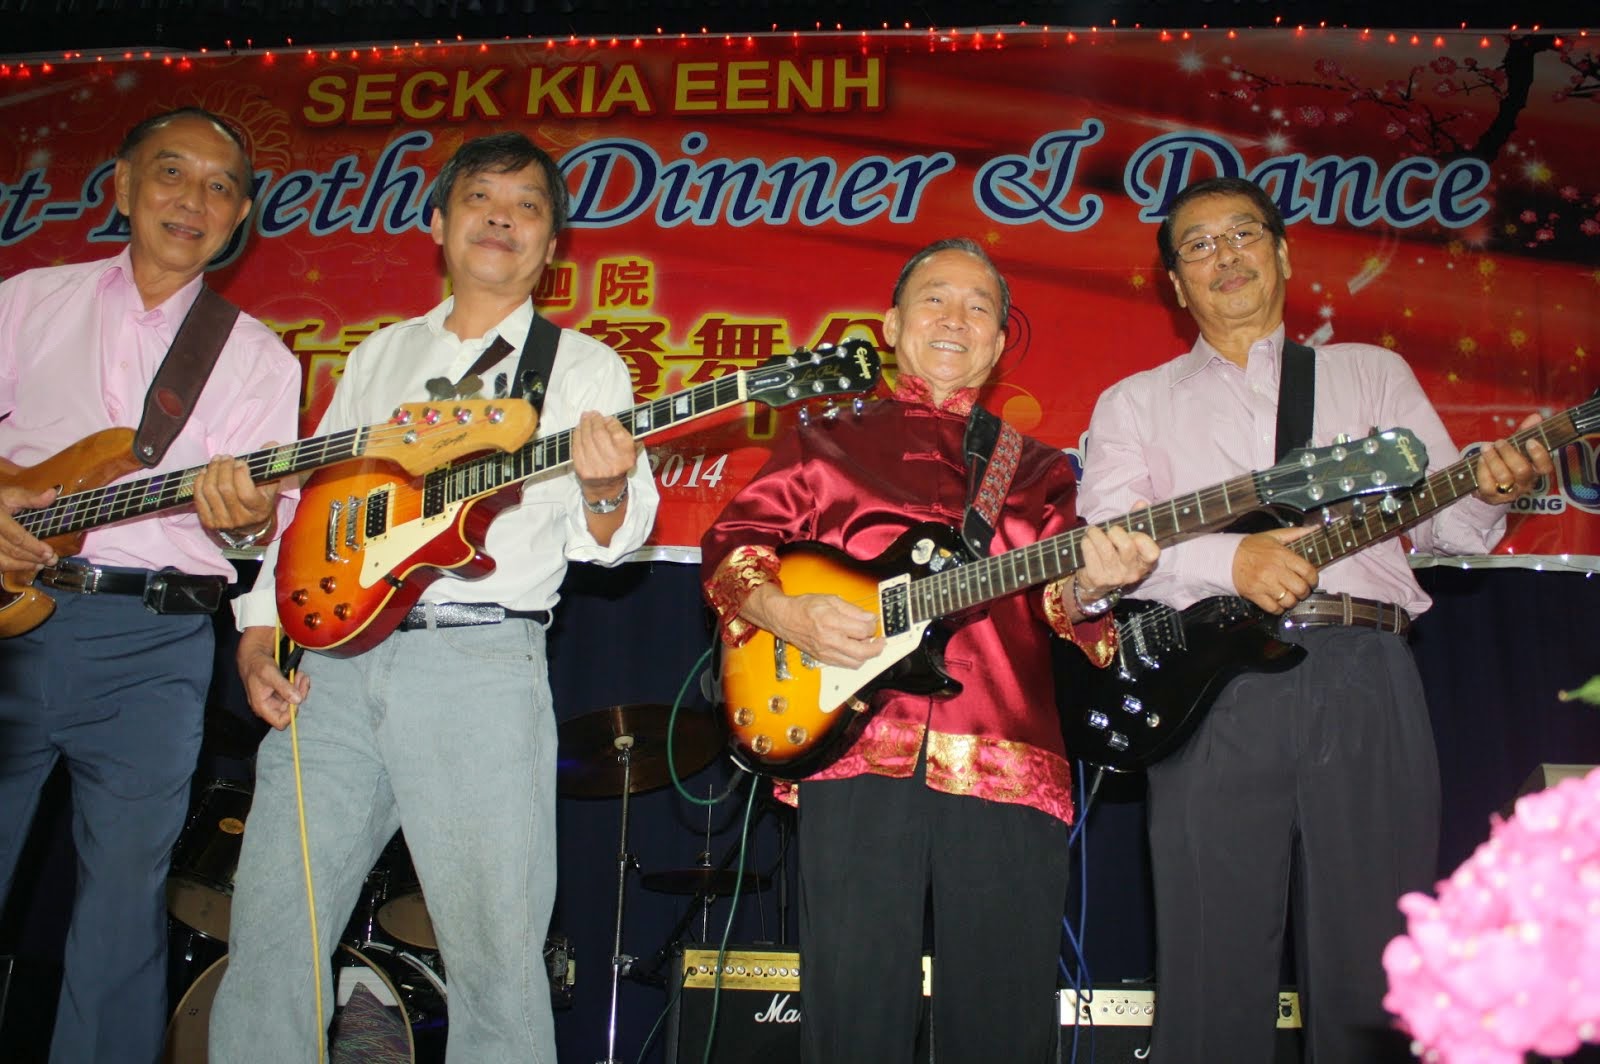 The Evergreen Band playing for th SKE annual dinner and dance